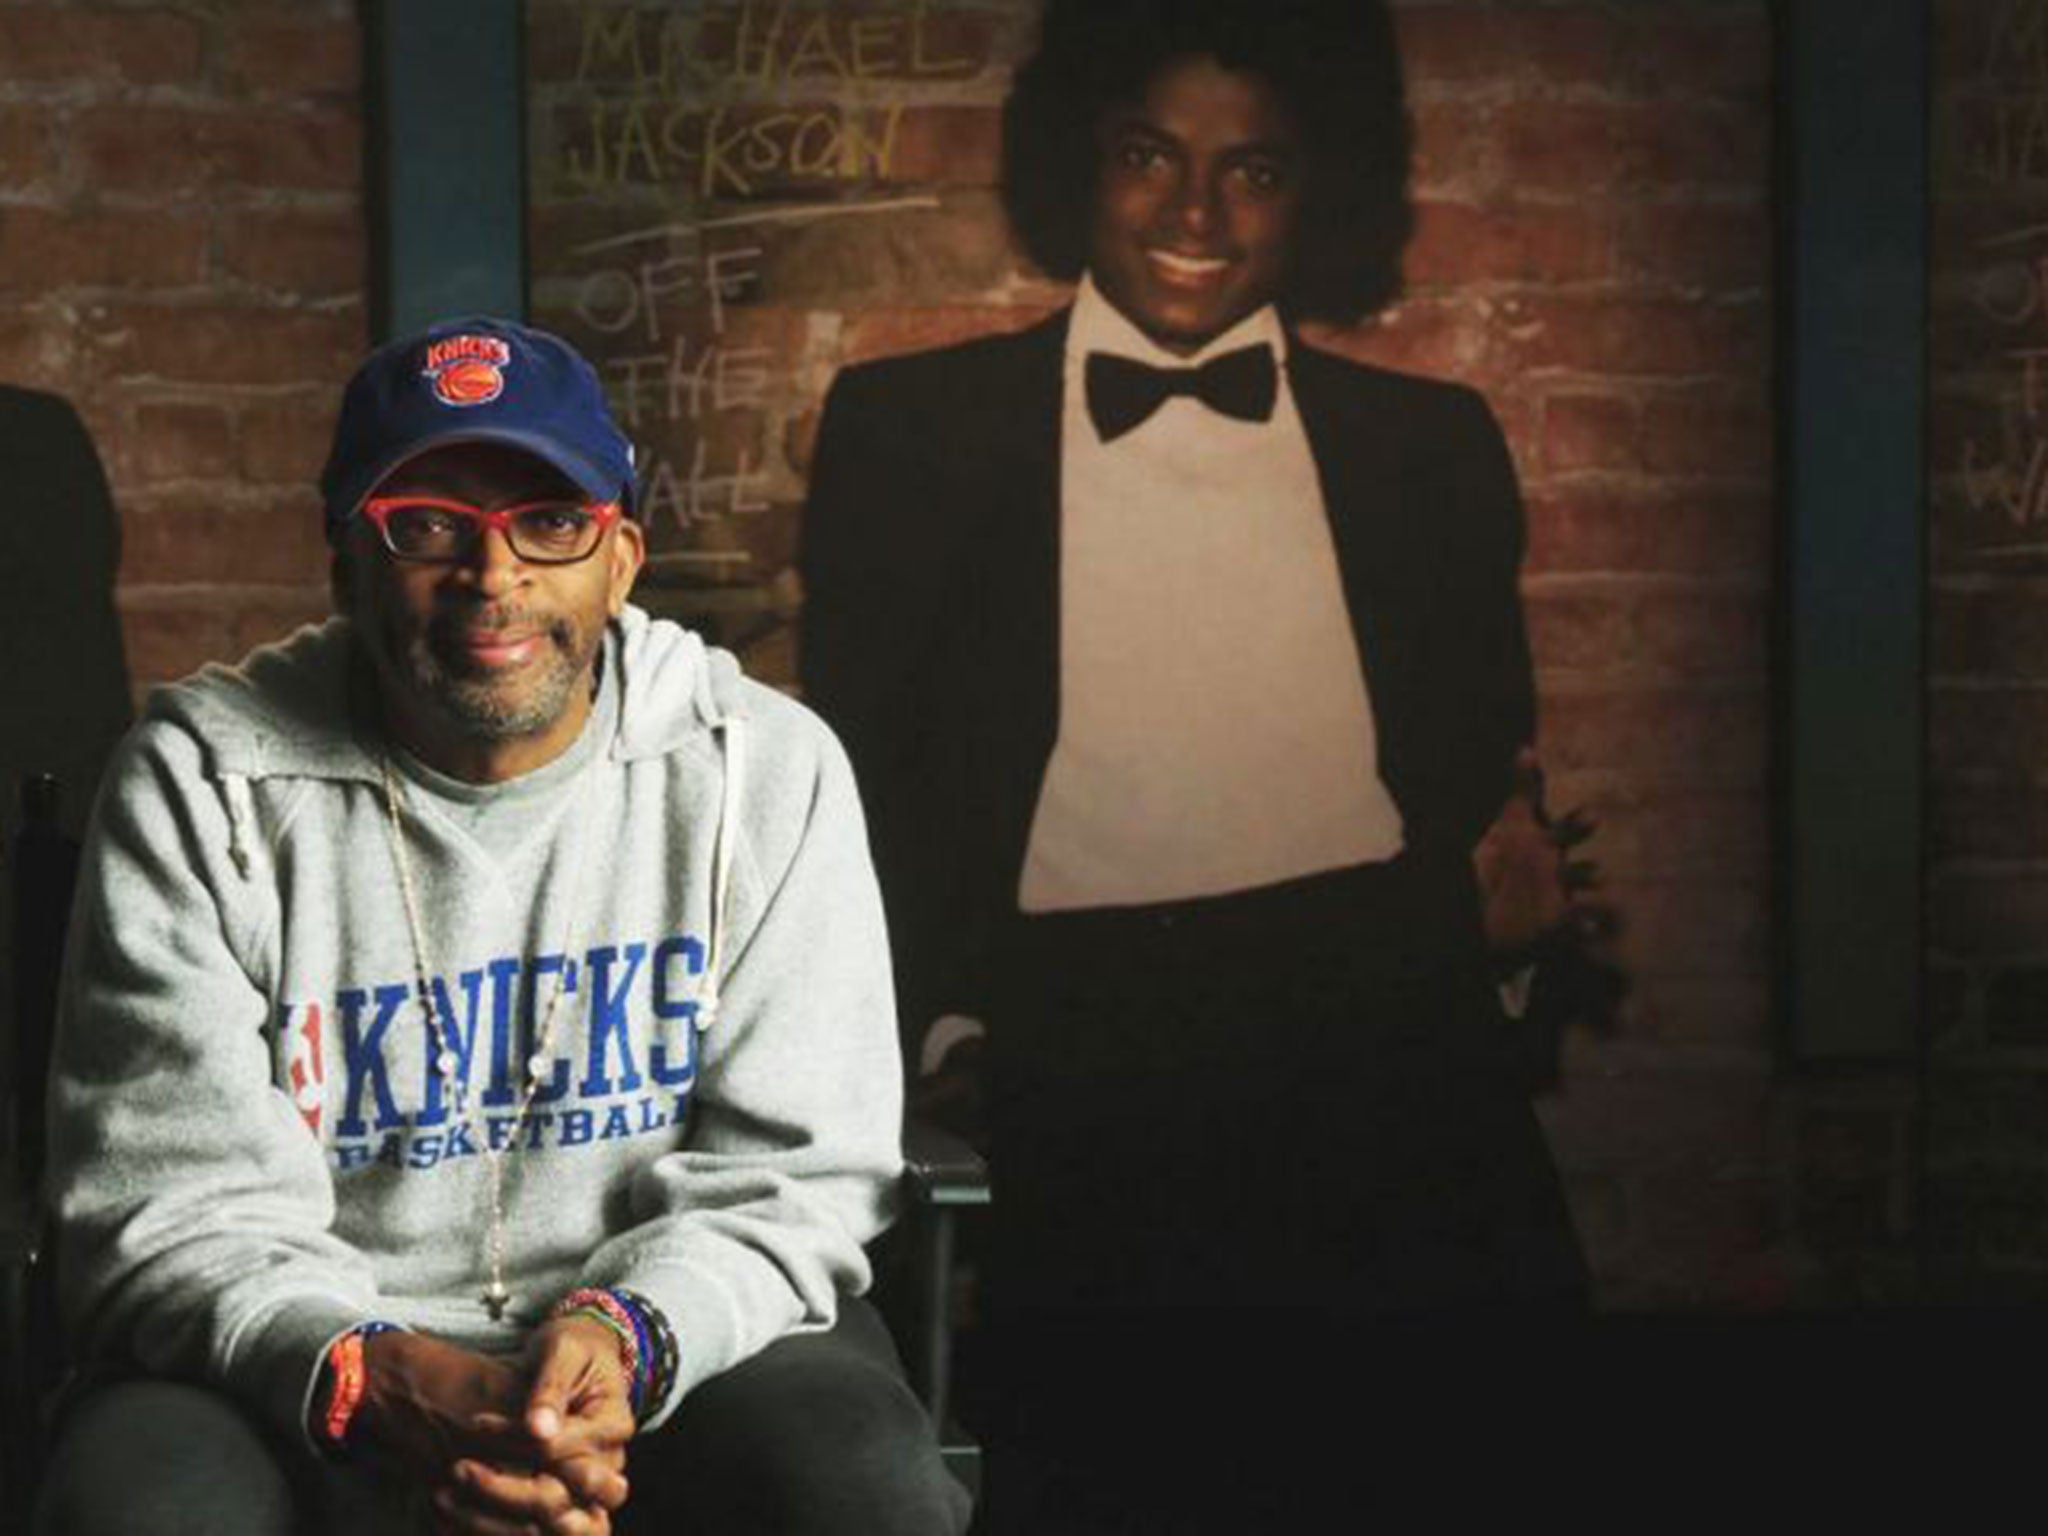 Spike Lee documents Jackson’s long walk to becoming the most famous man in the world